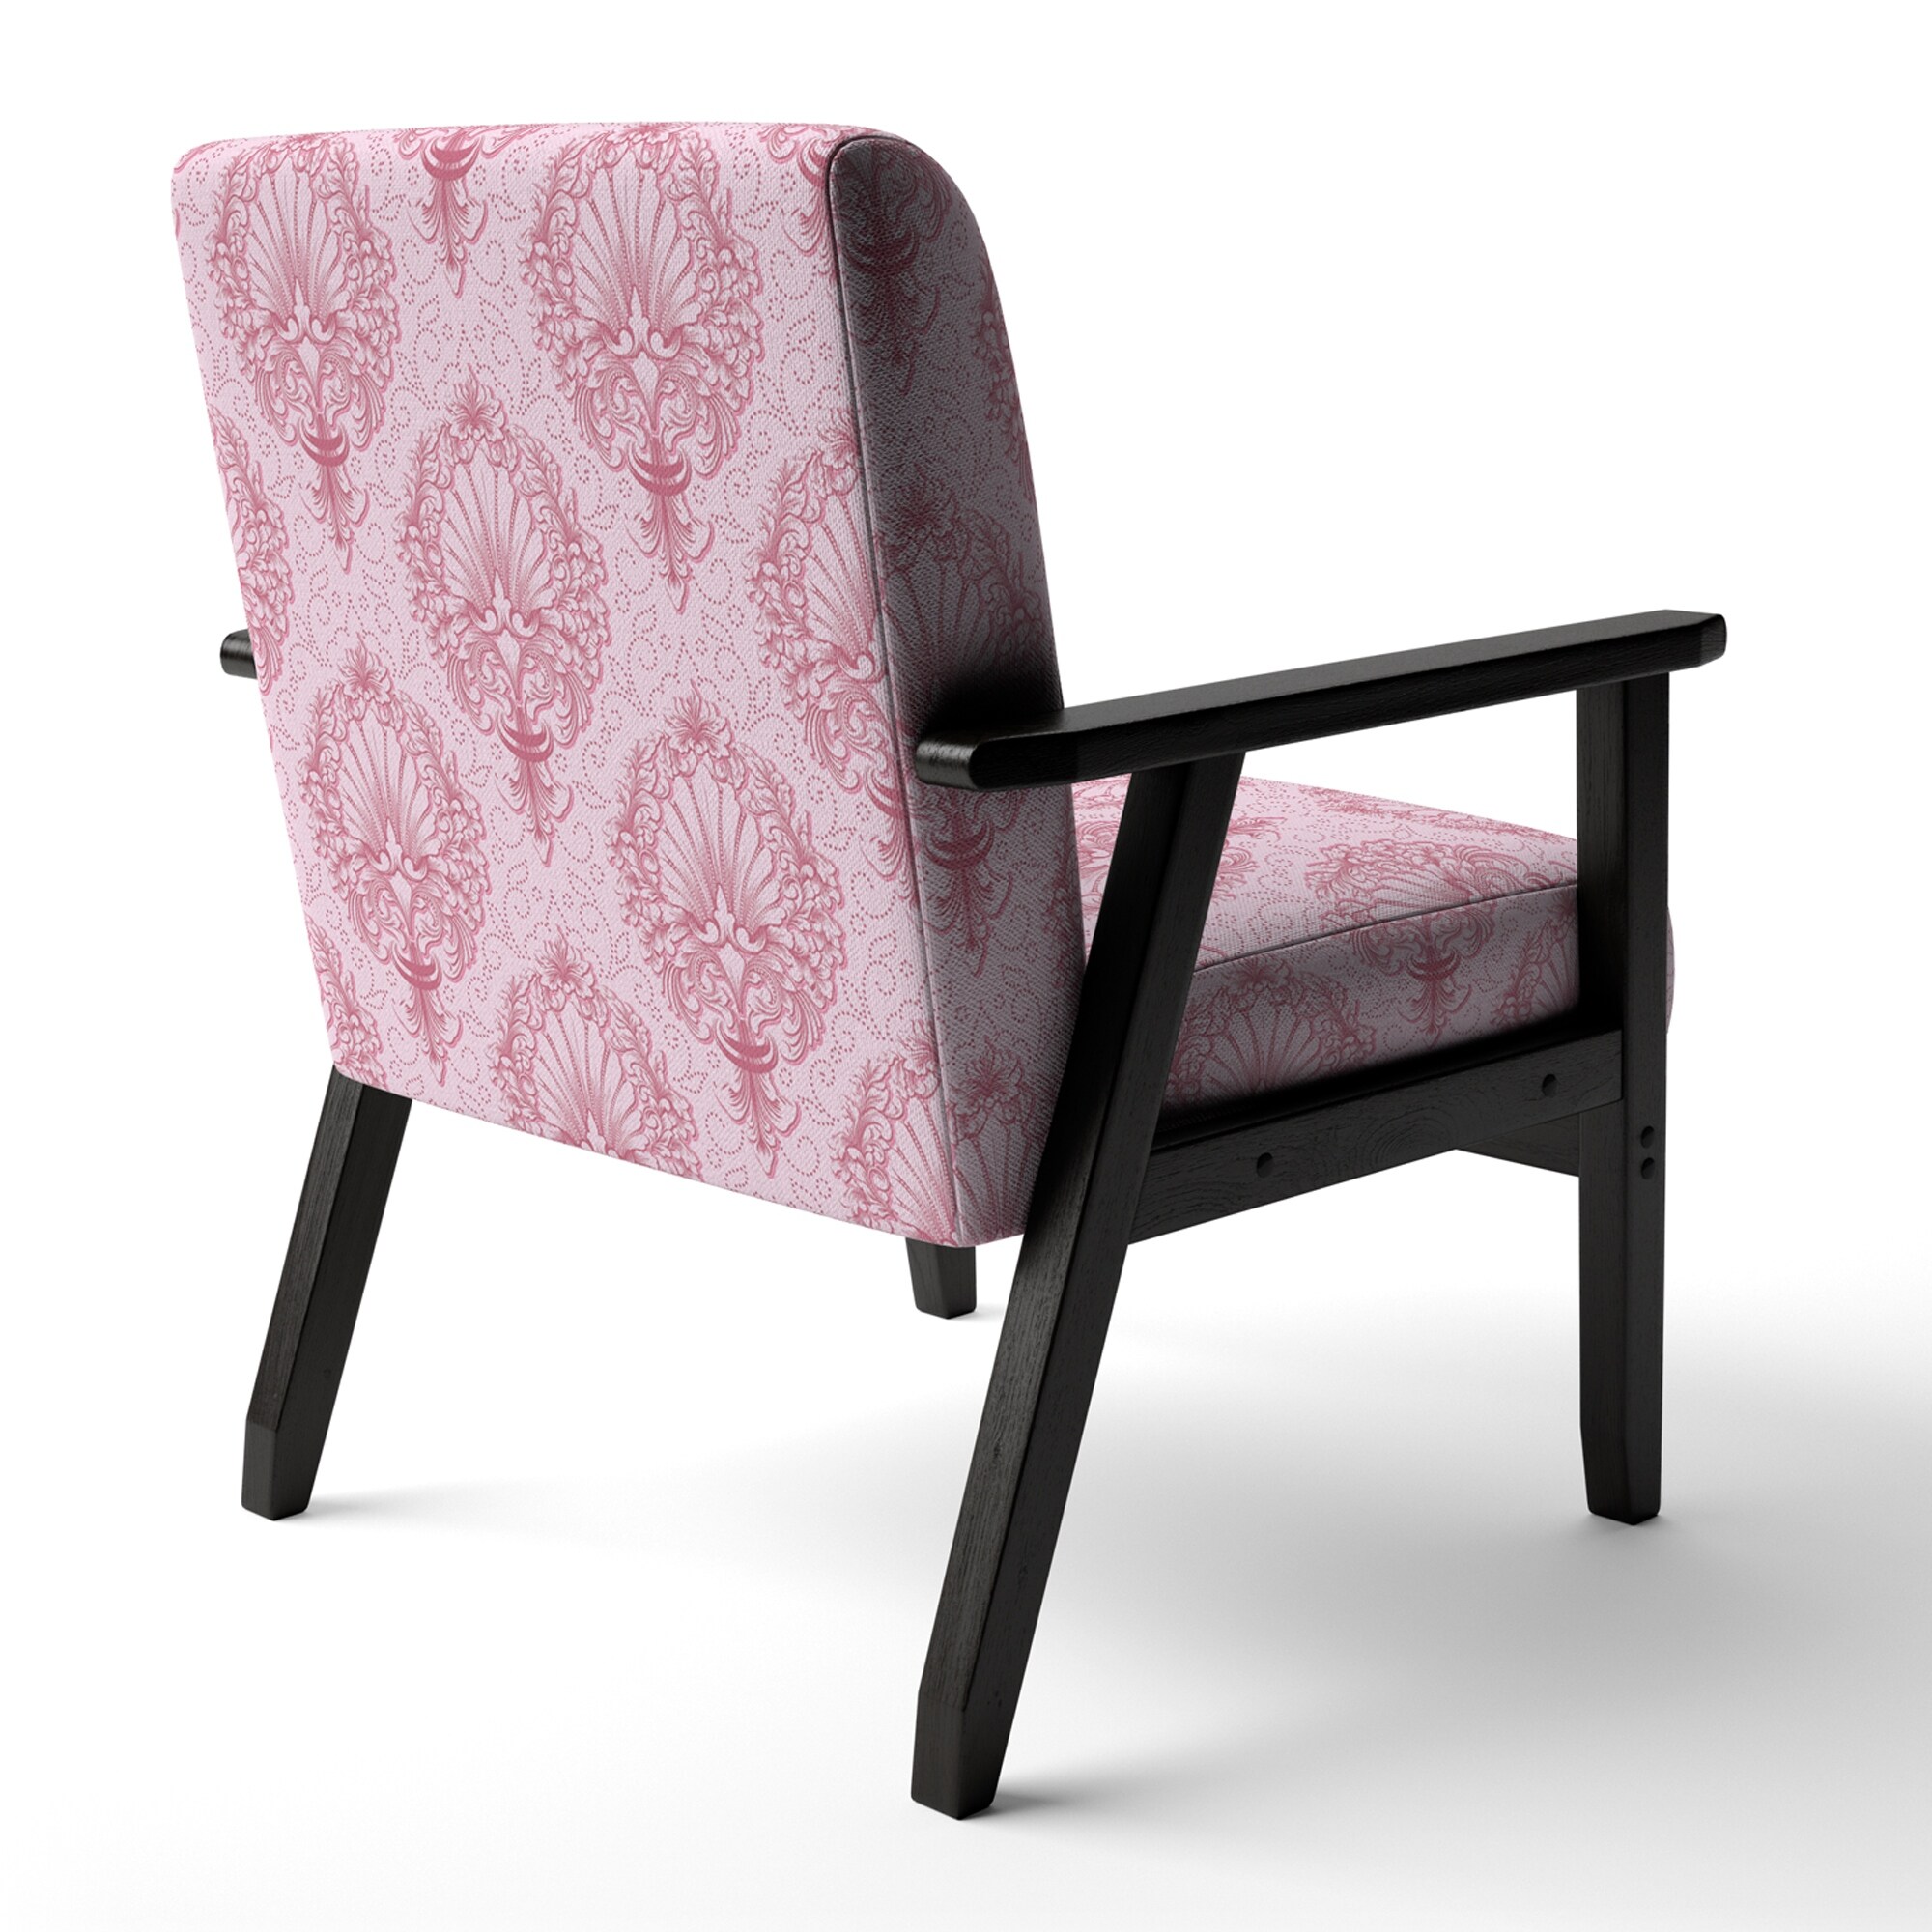 Designart "Pink Damask" Upholstered Patterned Accent Chair and Arm Chair